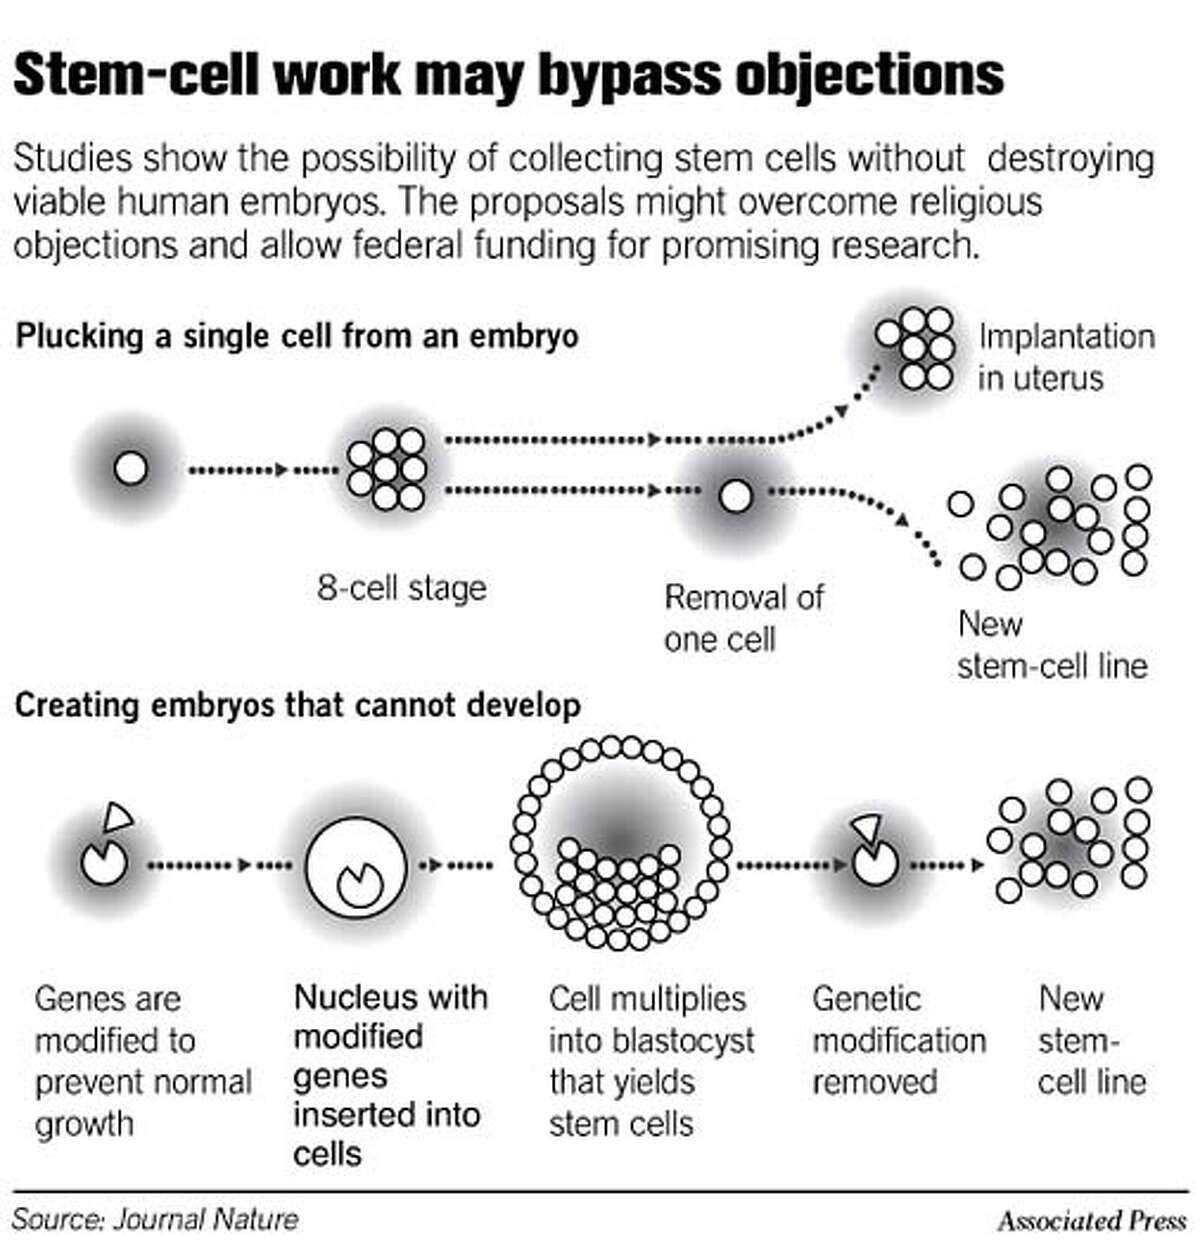 Stem-Cell Work May Bypass Objections. Associated Press Graphic